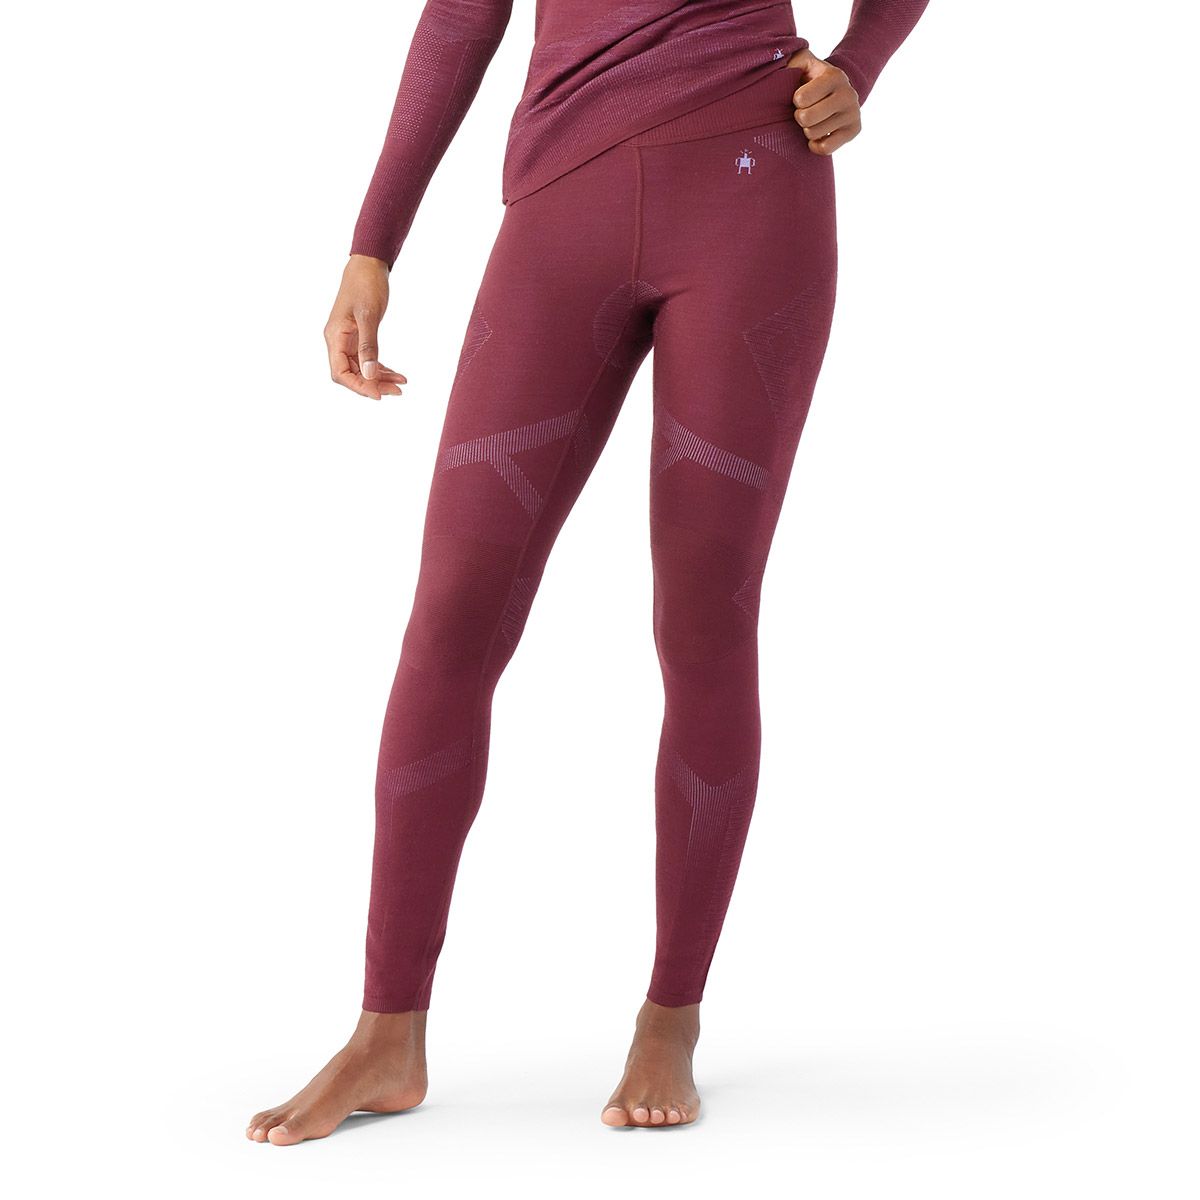 Thermowave Womens Merino Wool Arctic Pants - Leggings- Base Layer Size Small